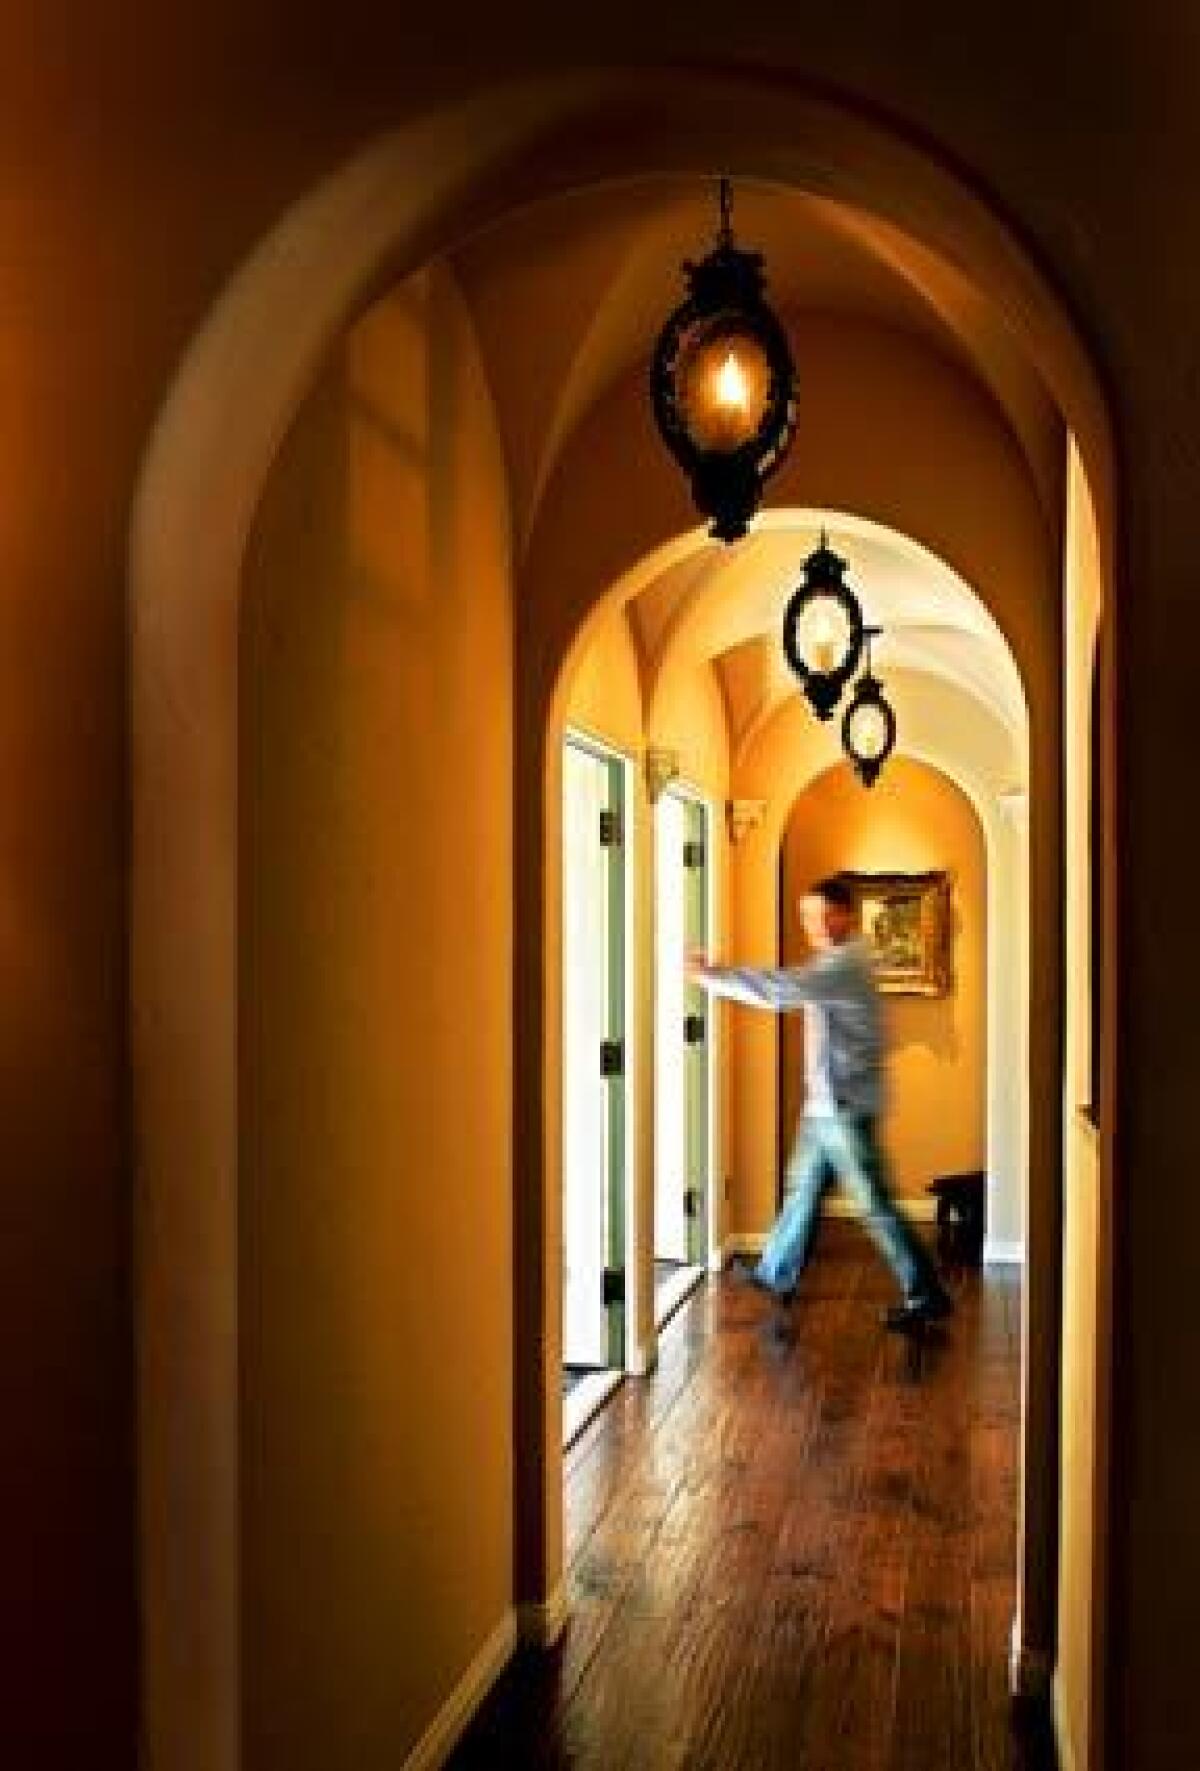 When John and Eva Simpson remodeled their 1920s Spanish Revival home in San Marino, they drew on cultural fusion to create a Spanish style with a twist. Here, John Simpson passes though a hallway with its hand-hewn walnut floors, a groin vault ceiling and custom light fixtures.